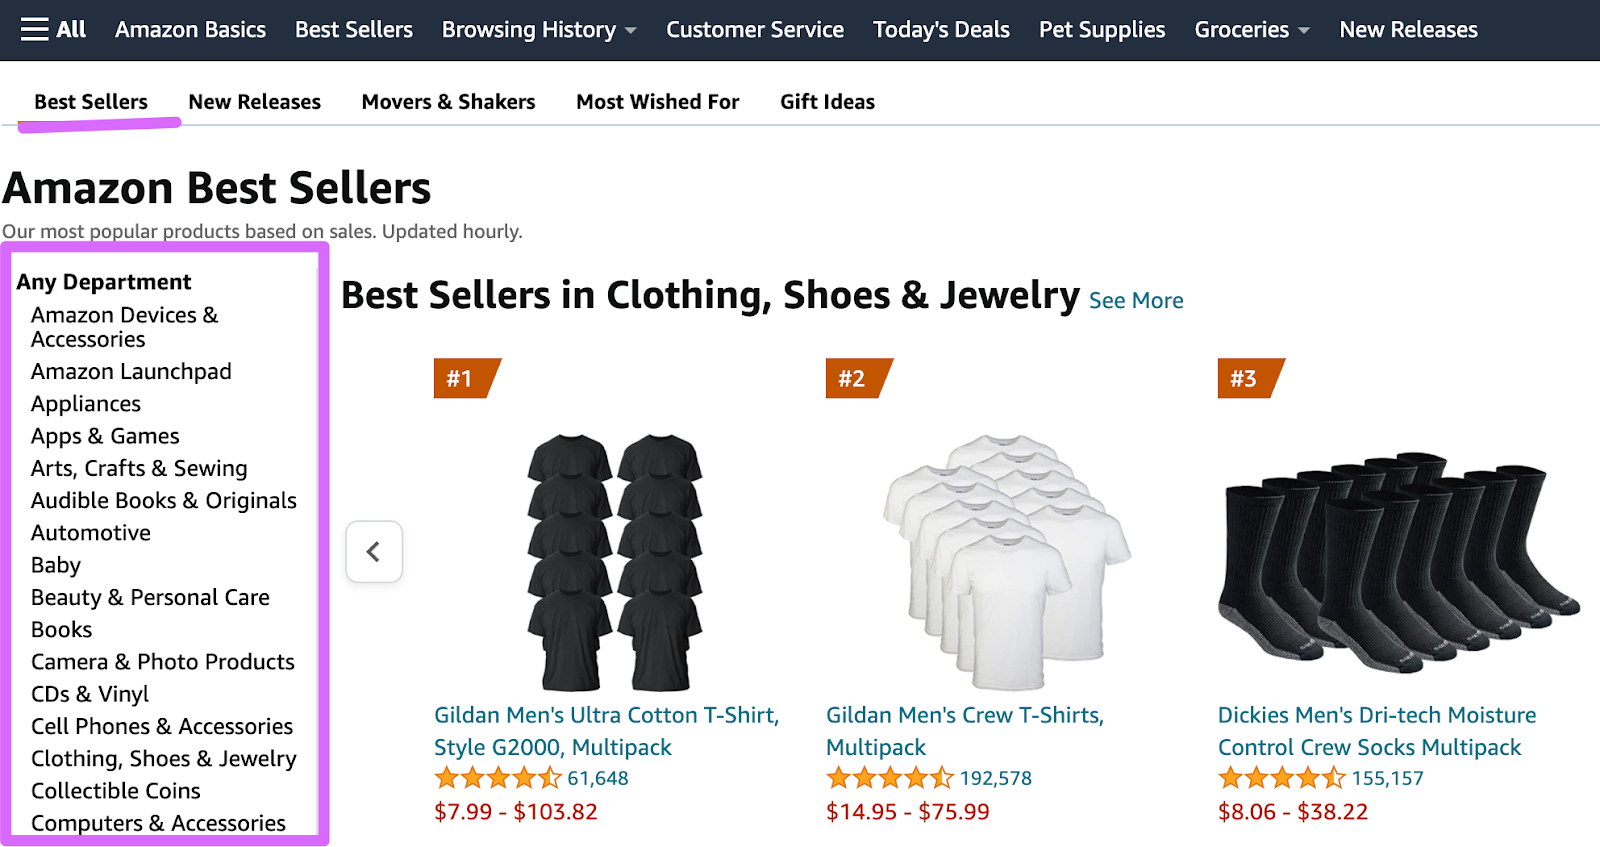 amazon best sellers page categories appearing in left side bar